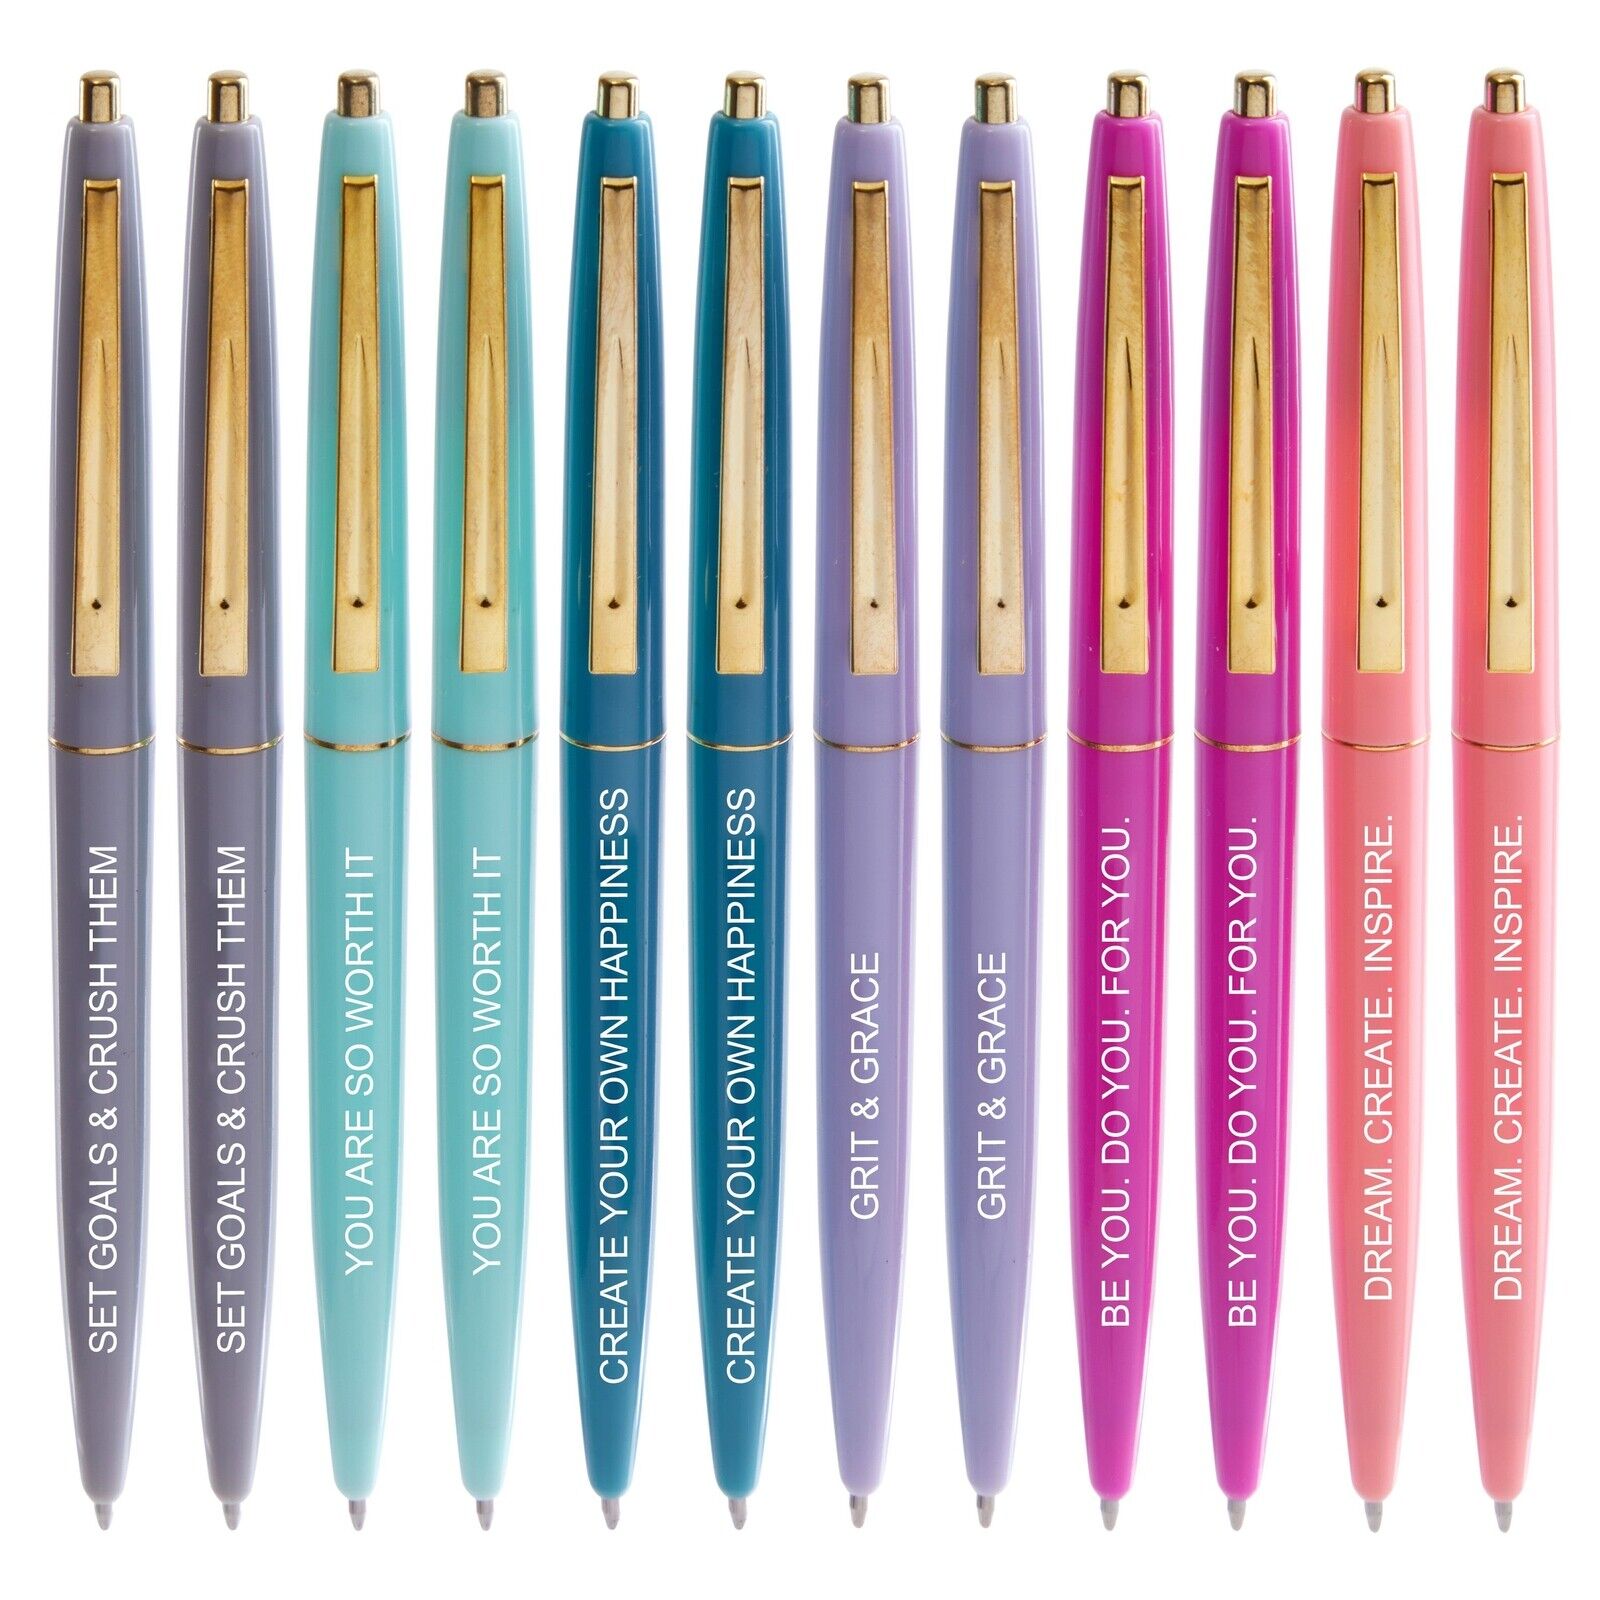 12 Pack Inspirational Ballpoint Pens with Motivational Messages (6 Colors)